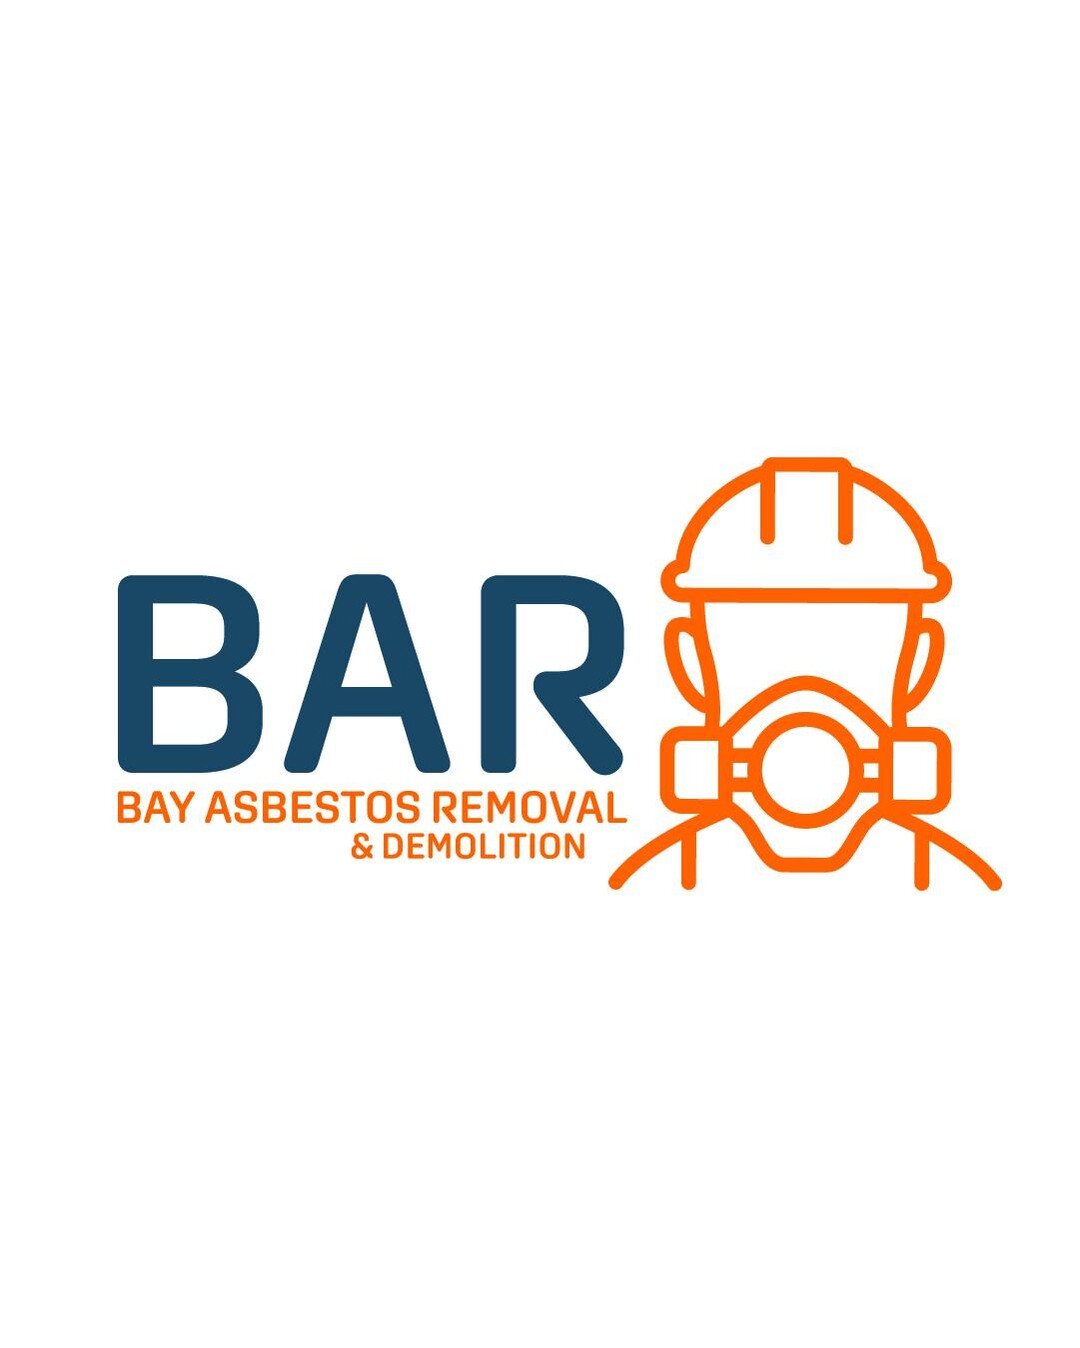 It was great working with @bar_bayasbestosremoval to create a such a clean, bright visual identity. 

Are you a tradie that needs to update your visual identity? Get in touch, we'd love to work with you!

#colorfast #colorfastagency #colorfastdesigna